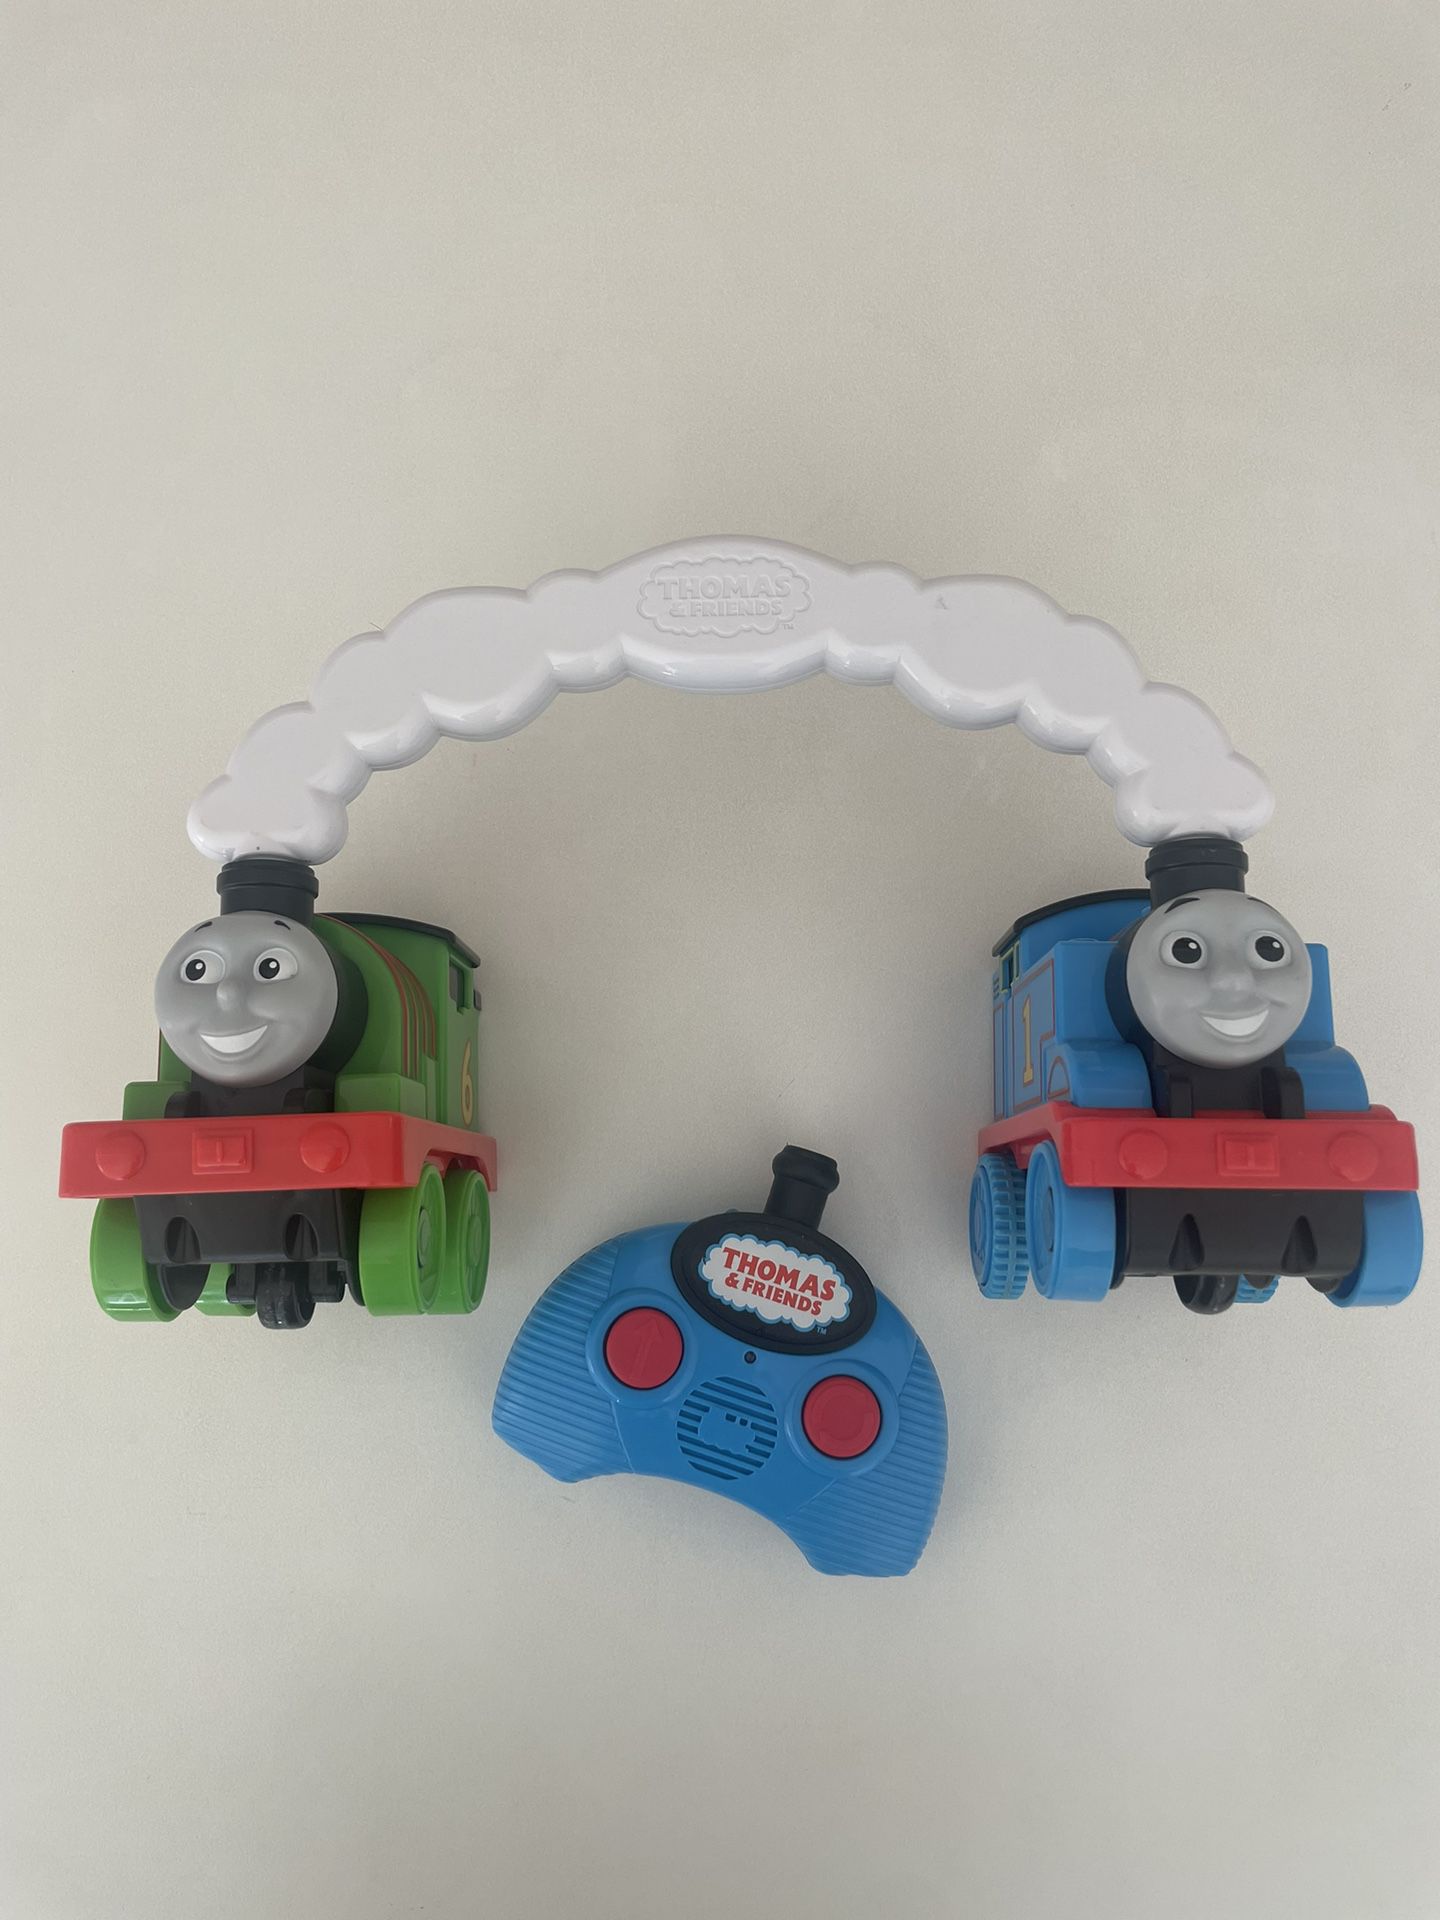 Thomas and friends race car